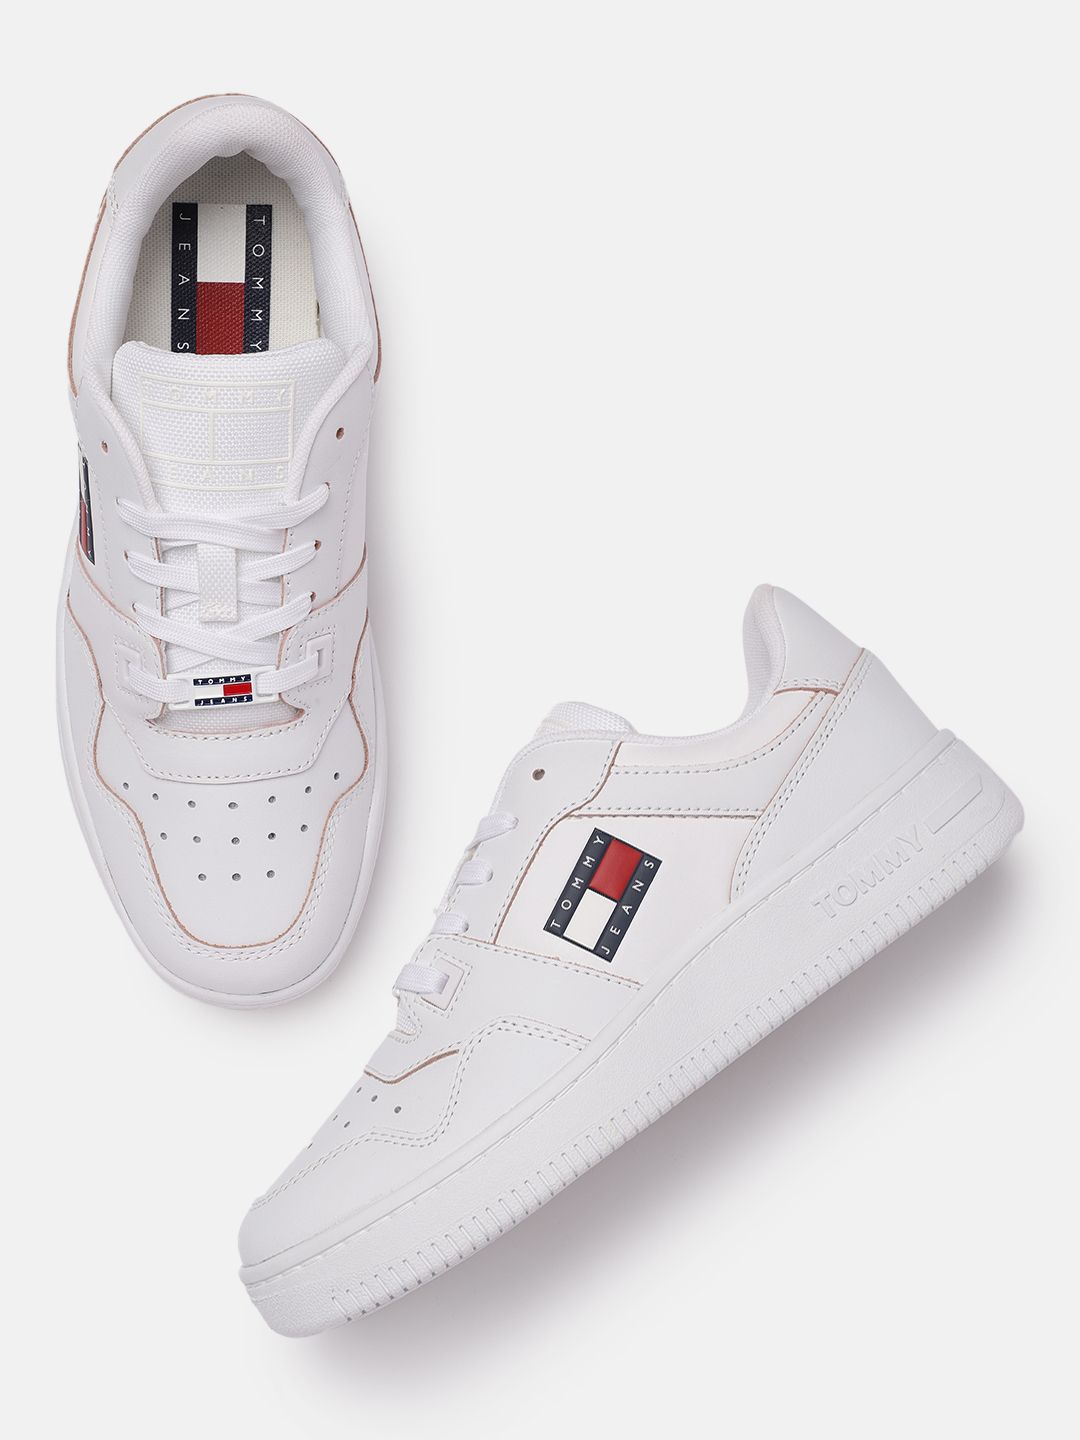 Tommy Hilfiger Women White Leather Sneakers Price in India